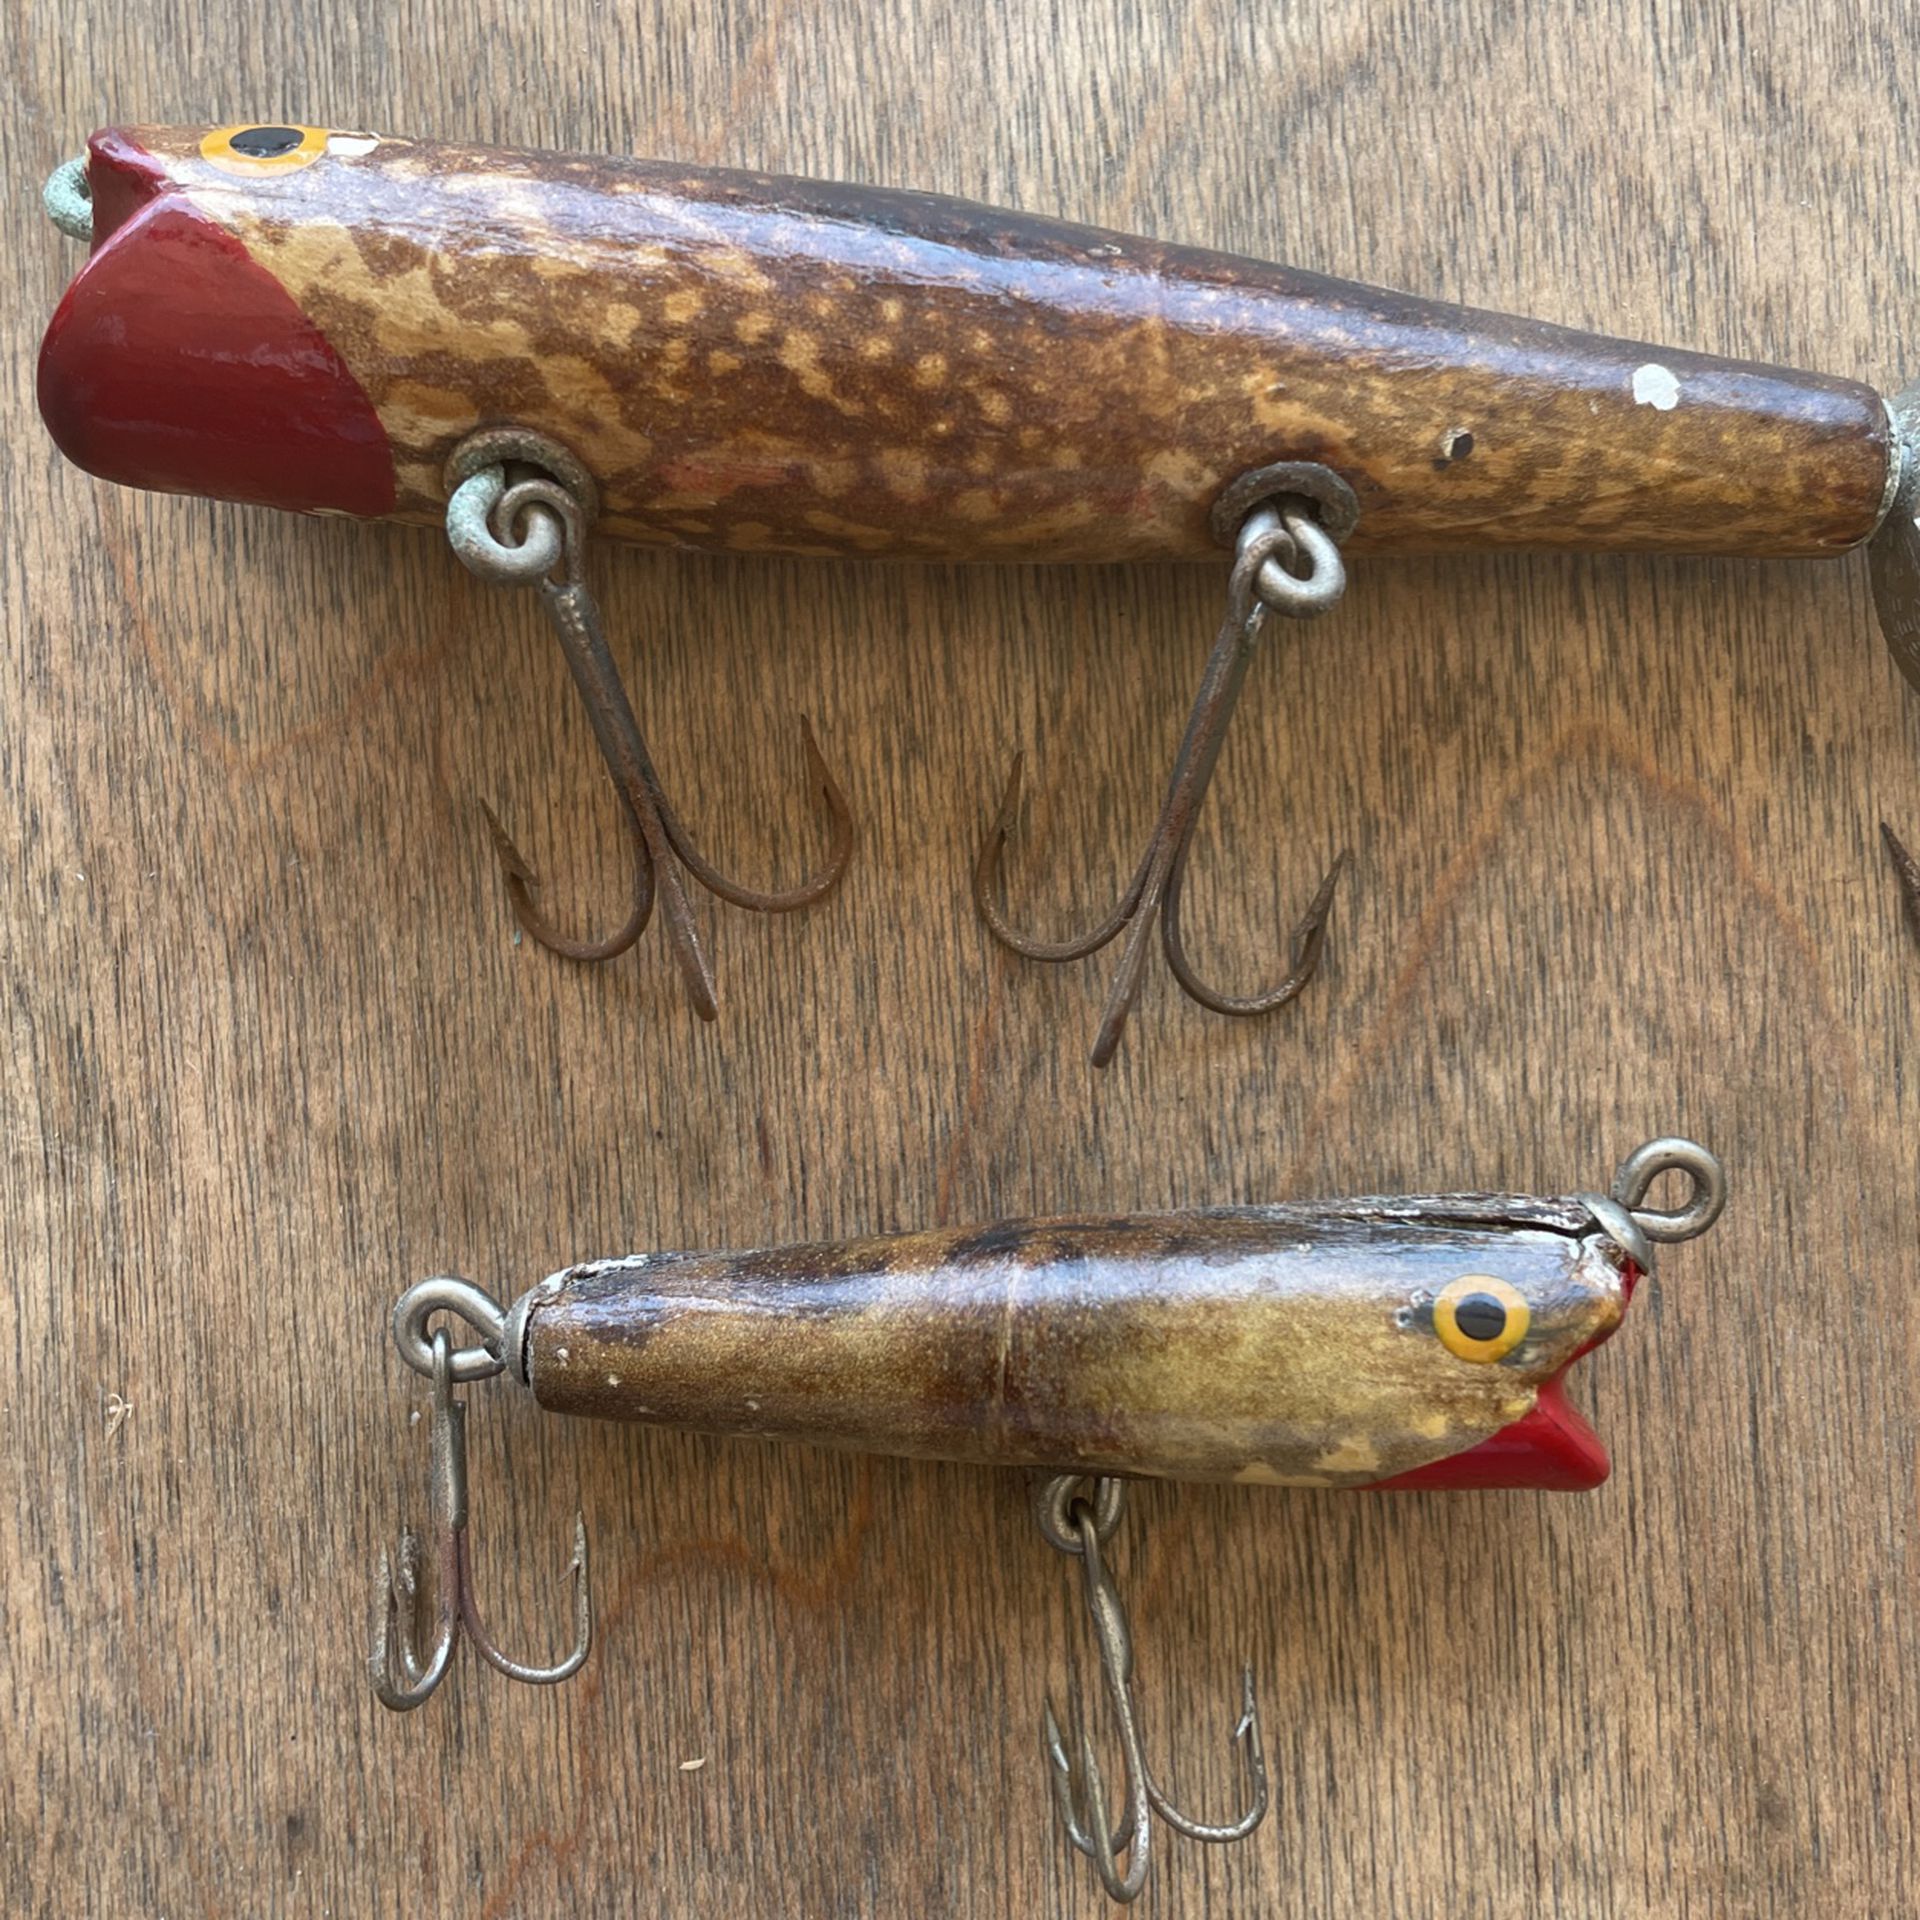 Check out this 90-year-old FROG SKIN lure! (Eger Bait Co. lure